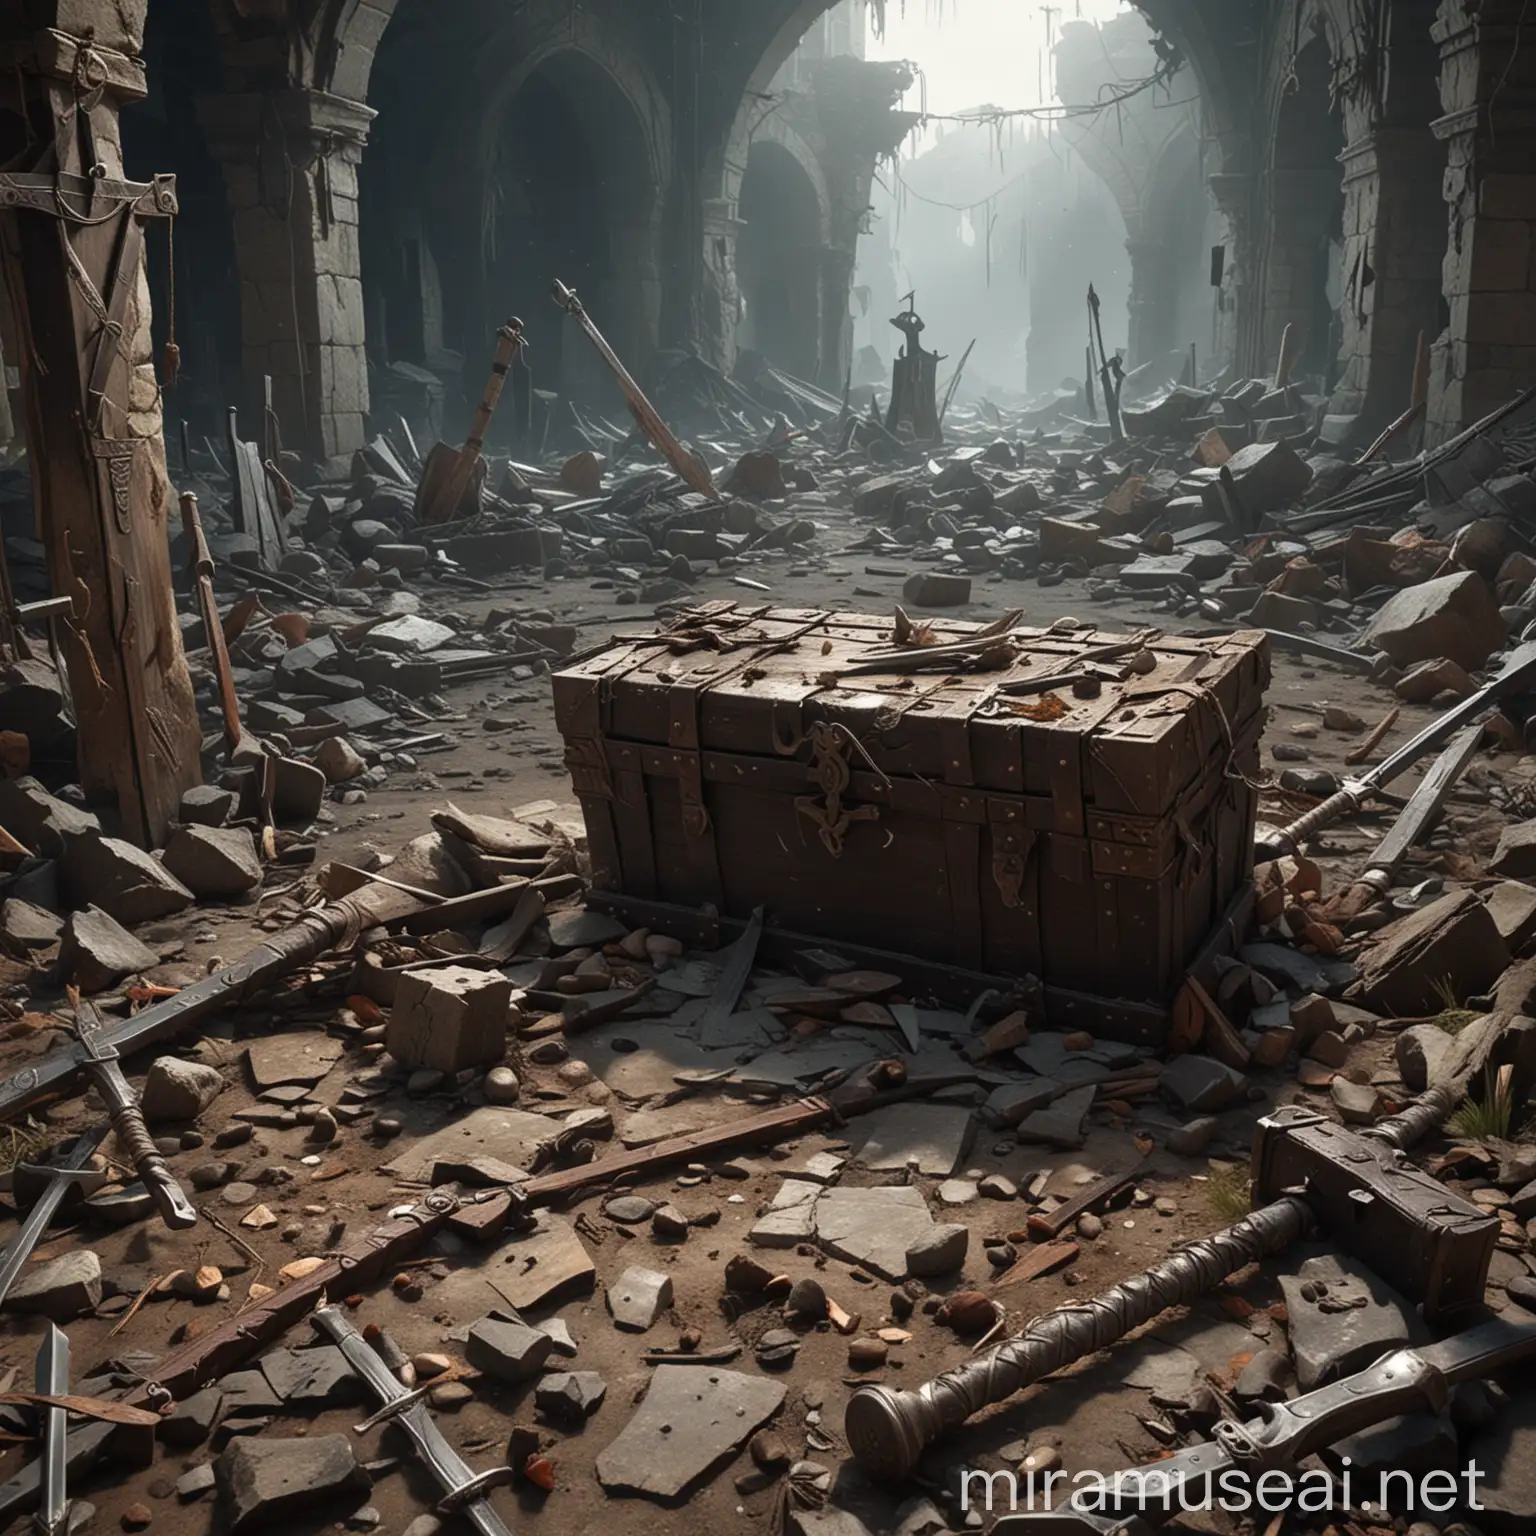 destroyed Neltharium where a chest lies in ruins and different types of weapons are stuck around (swords, axes, sledgehammers, staves) there are traces of magic and witchcraft in the air, and there is a calm and no one around